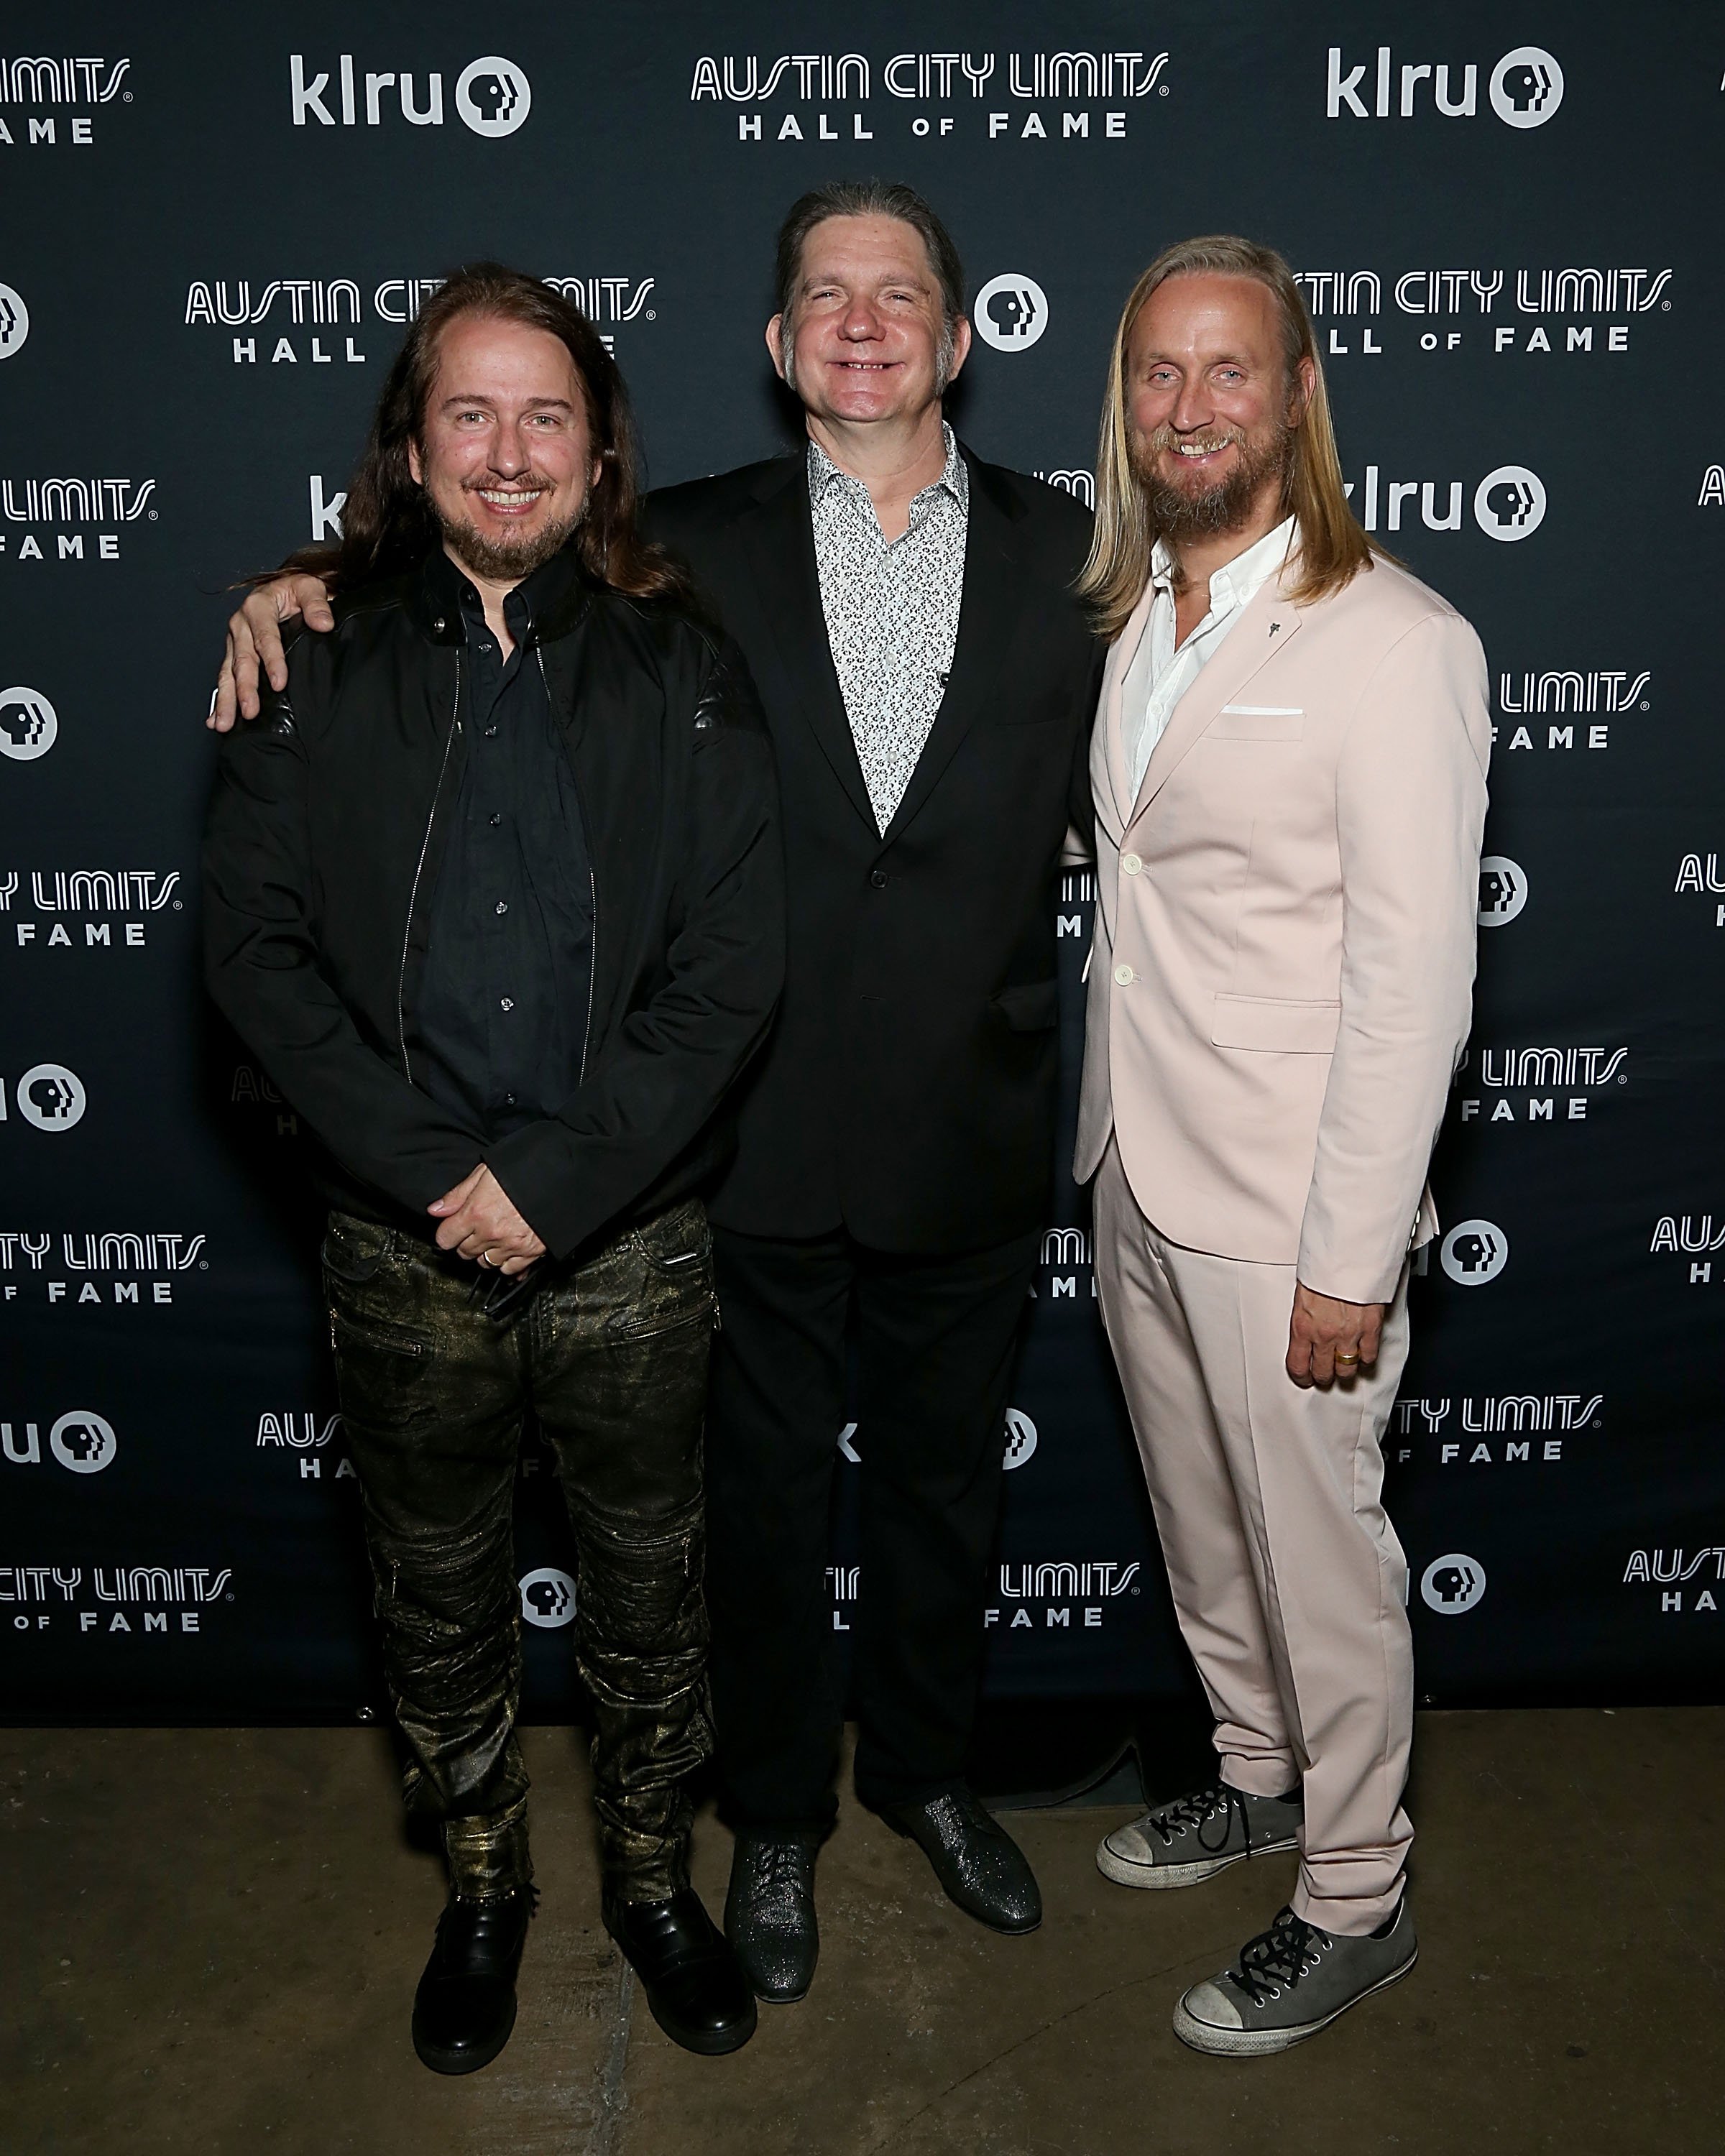 Roy Orbison Jr., Wesley Orbison and Alexander Orbison during the Austin City Limits 2017 Hall of Fame Inductions at ACL Live on October 25, 2017, in Austin, Texas. | Source: Getty Images